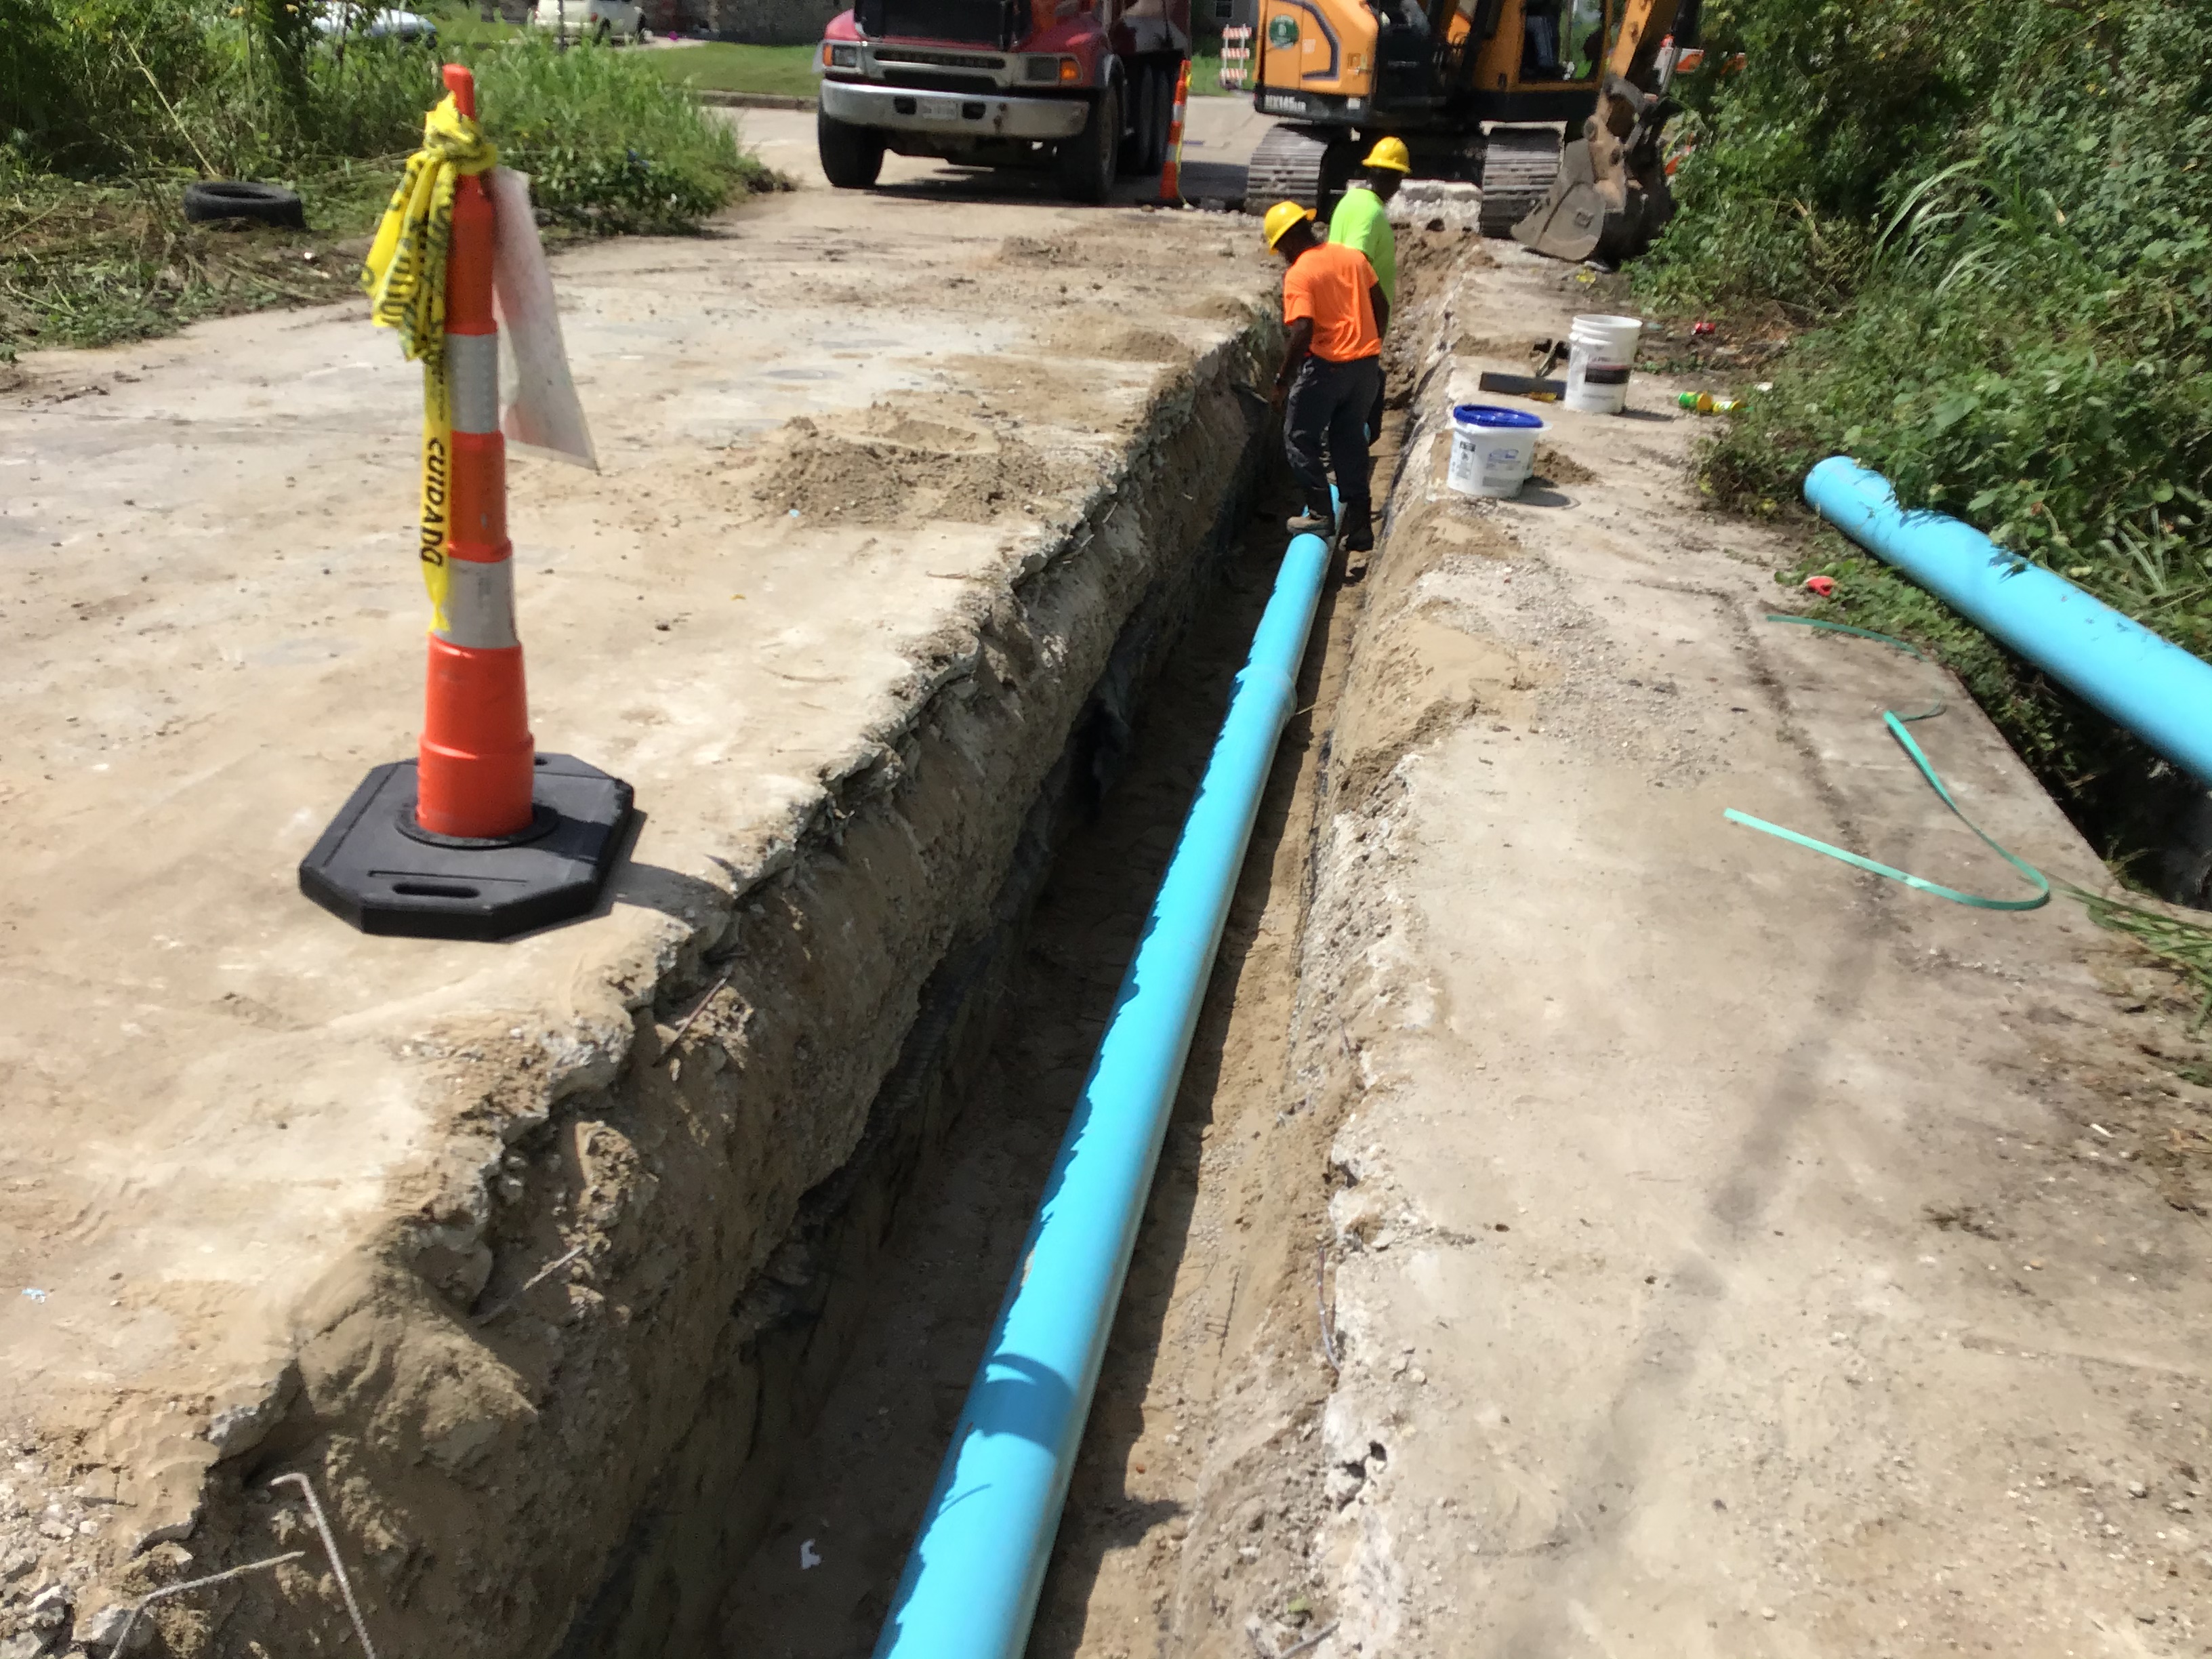 WATER LINE WORK CONTINUES ON THE LOWER NINTH WARD NORTHEAST GROUP B PROJECT